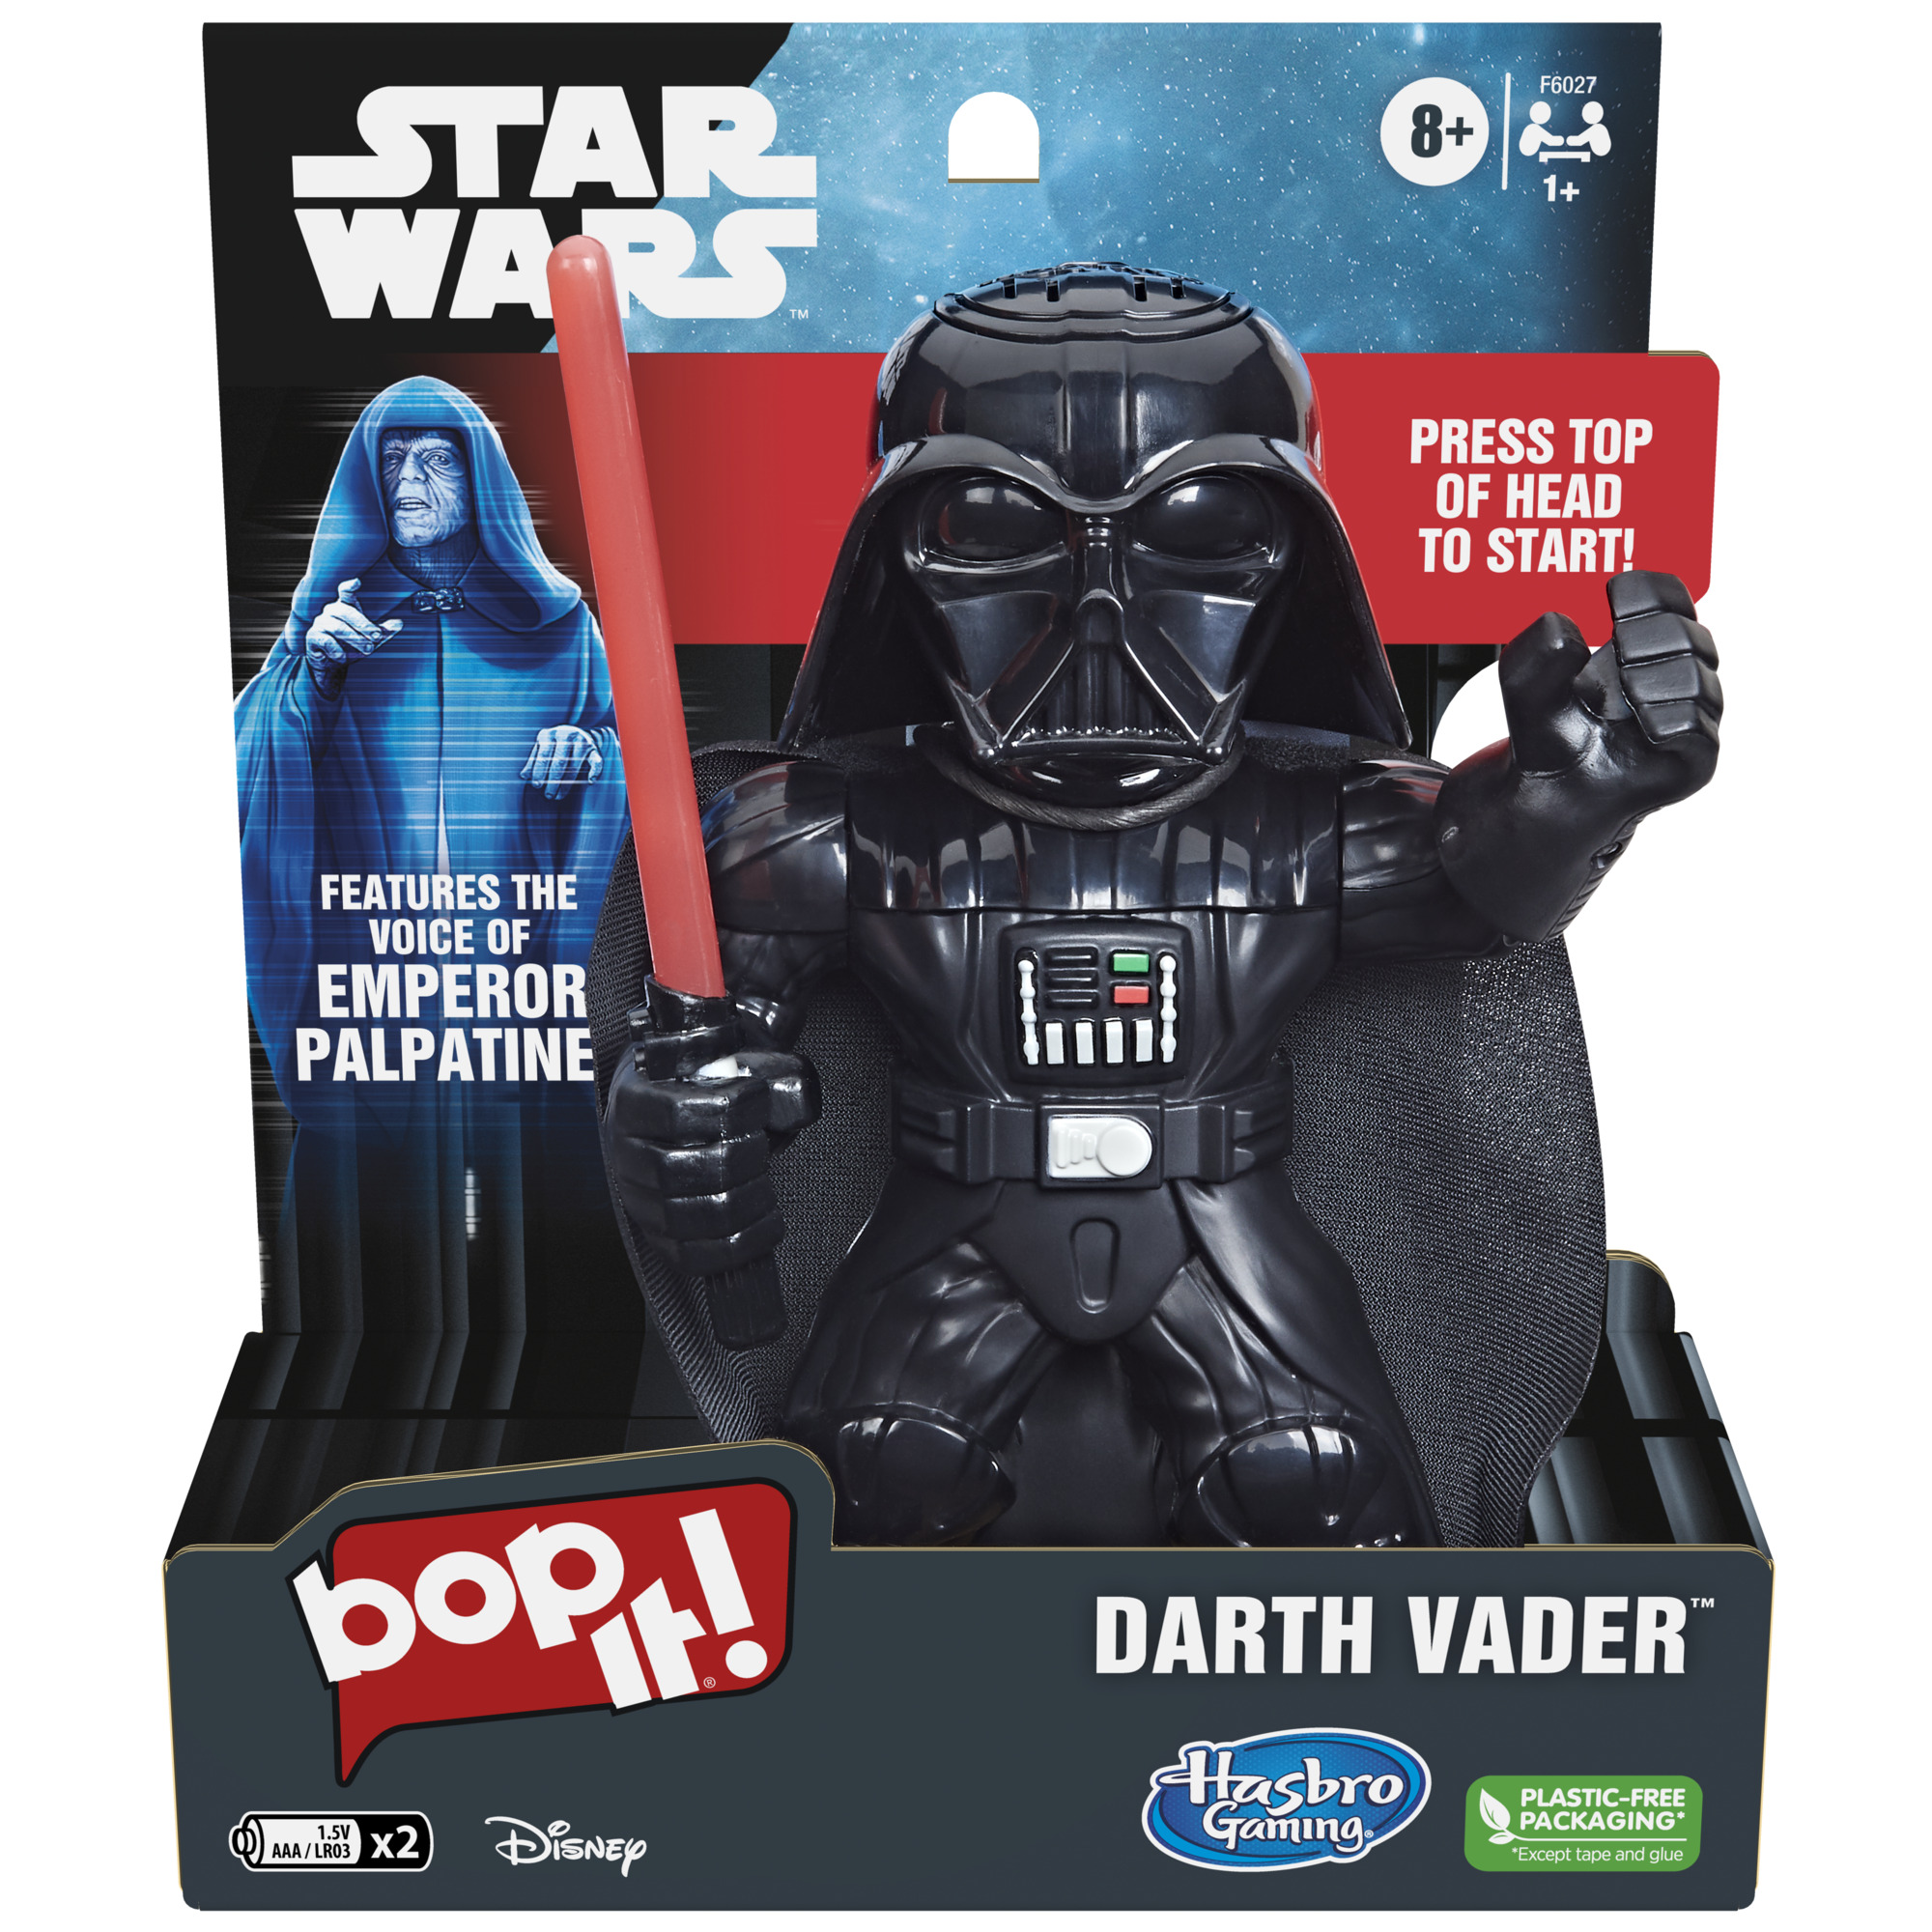 Bop It! Star Wars Darth Vader Edition Game, Features the Voice of Emperor Palpatine, Ages 8 and Up, Only At Walmart - image 1 of 5